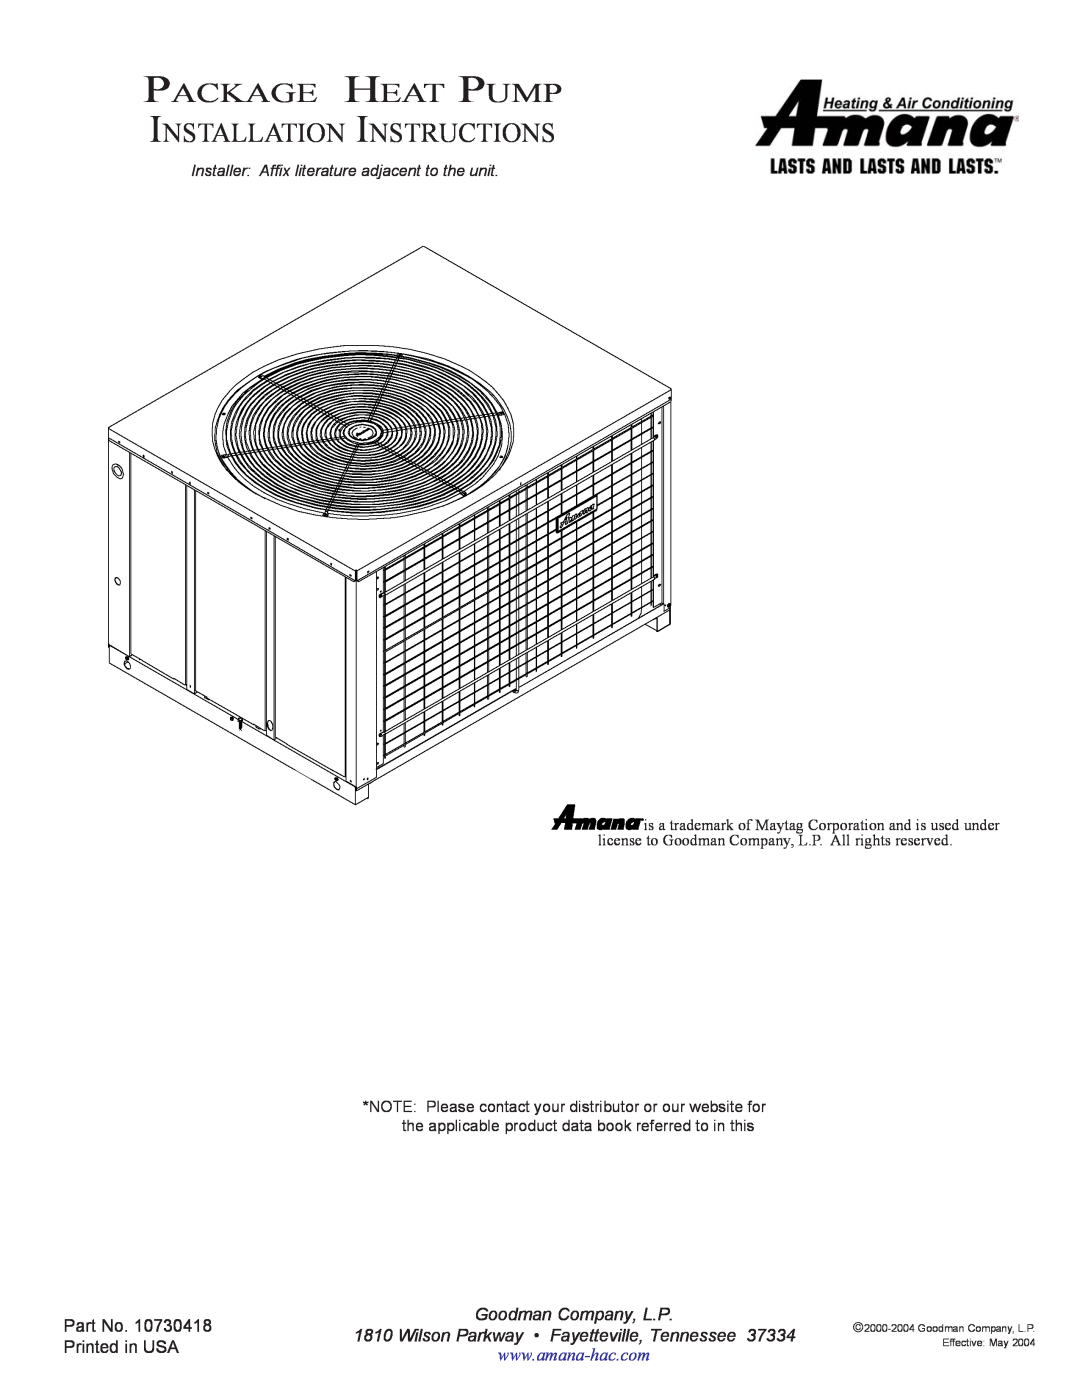 Amana 10730418 installation instructions Package Heat Pump Installation Instructions, Goodman Company, L.P 